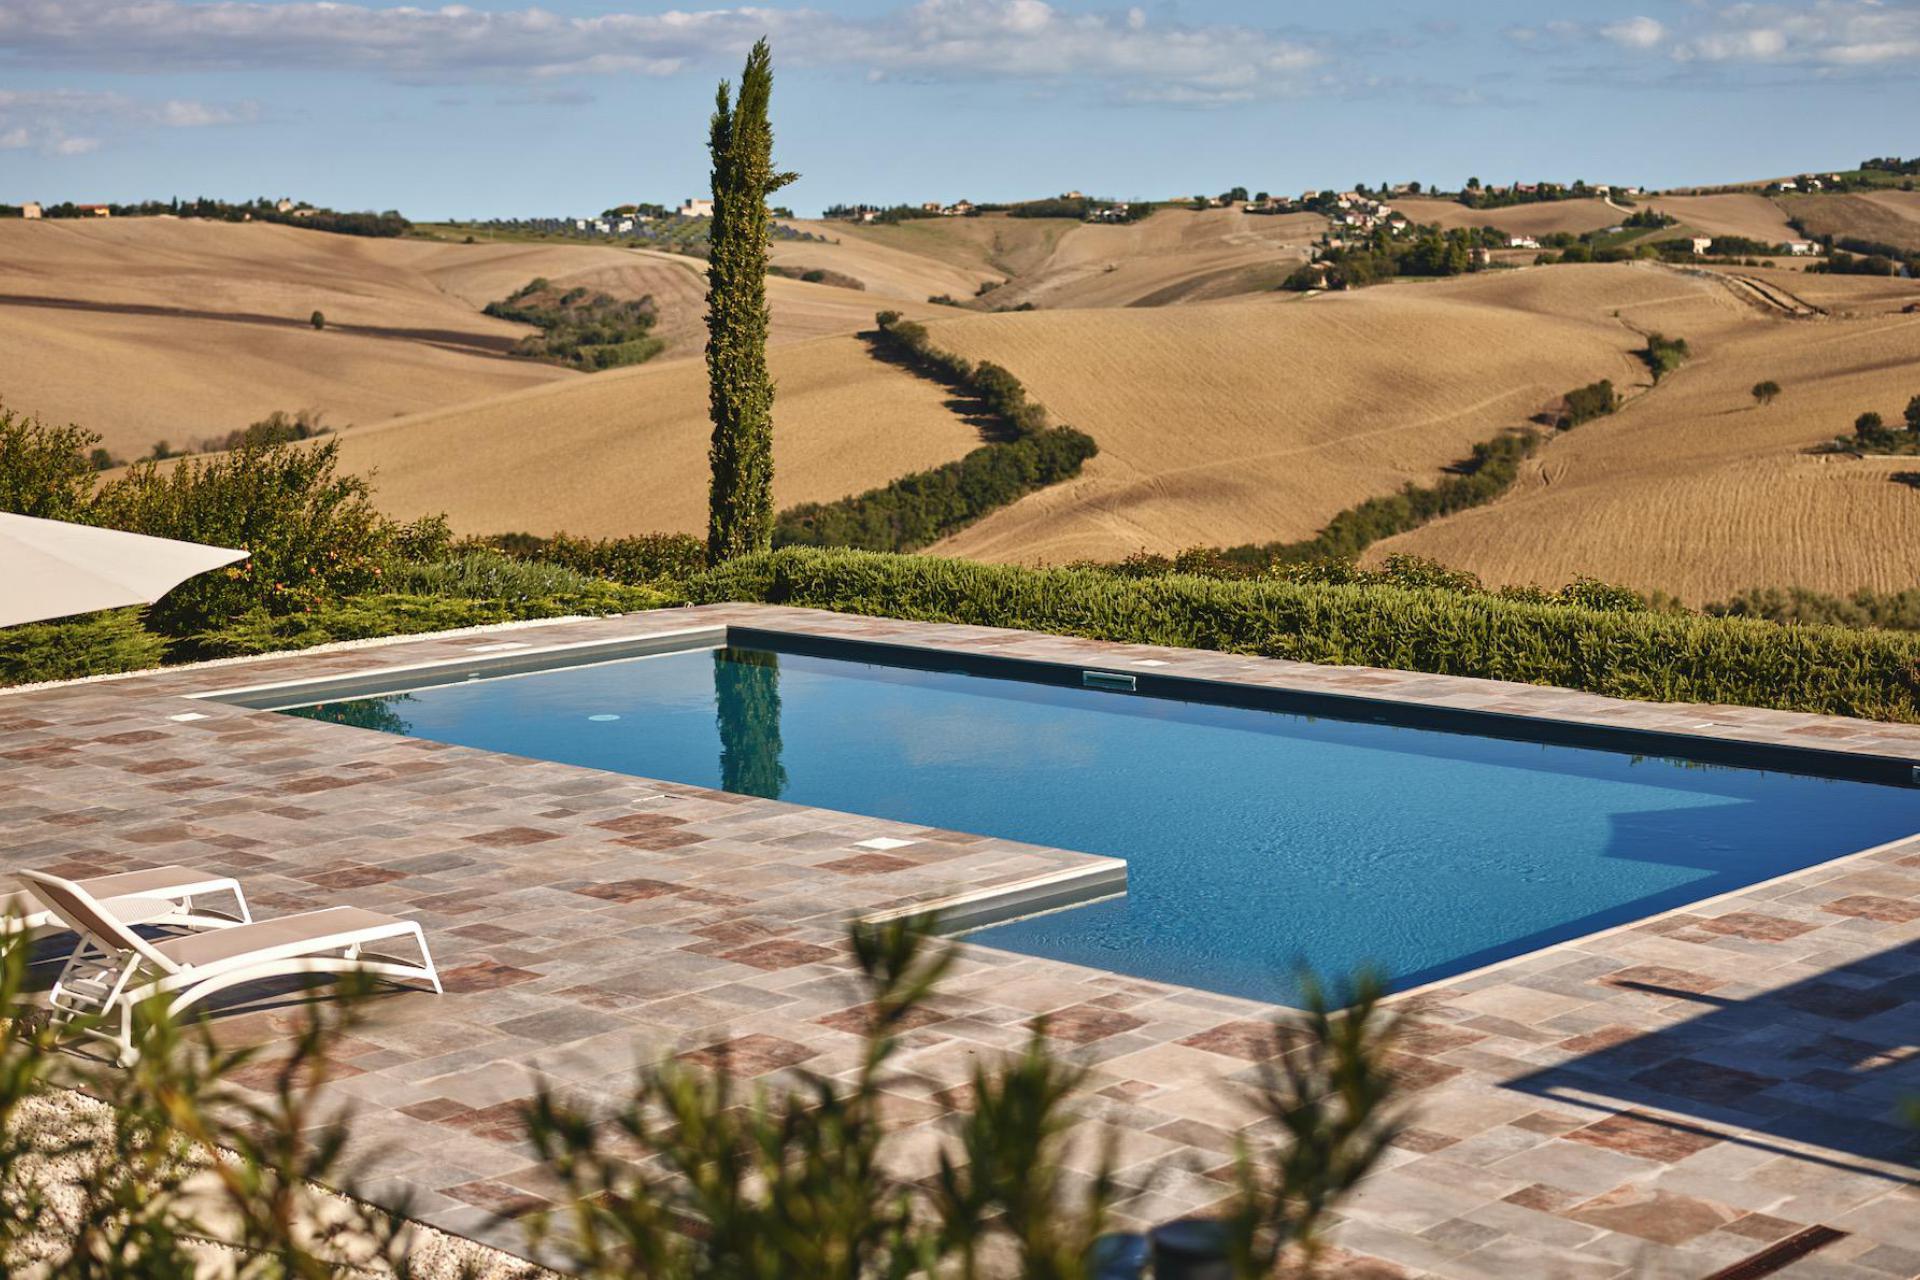 Agriturismo Le Marche Mooi country house in de Marche met bistrot